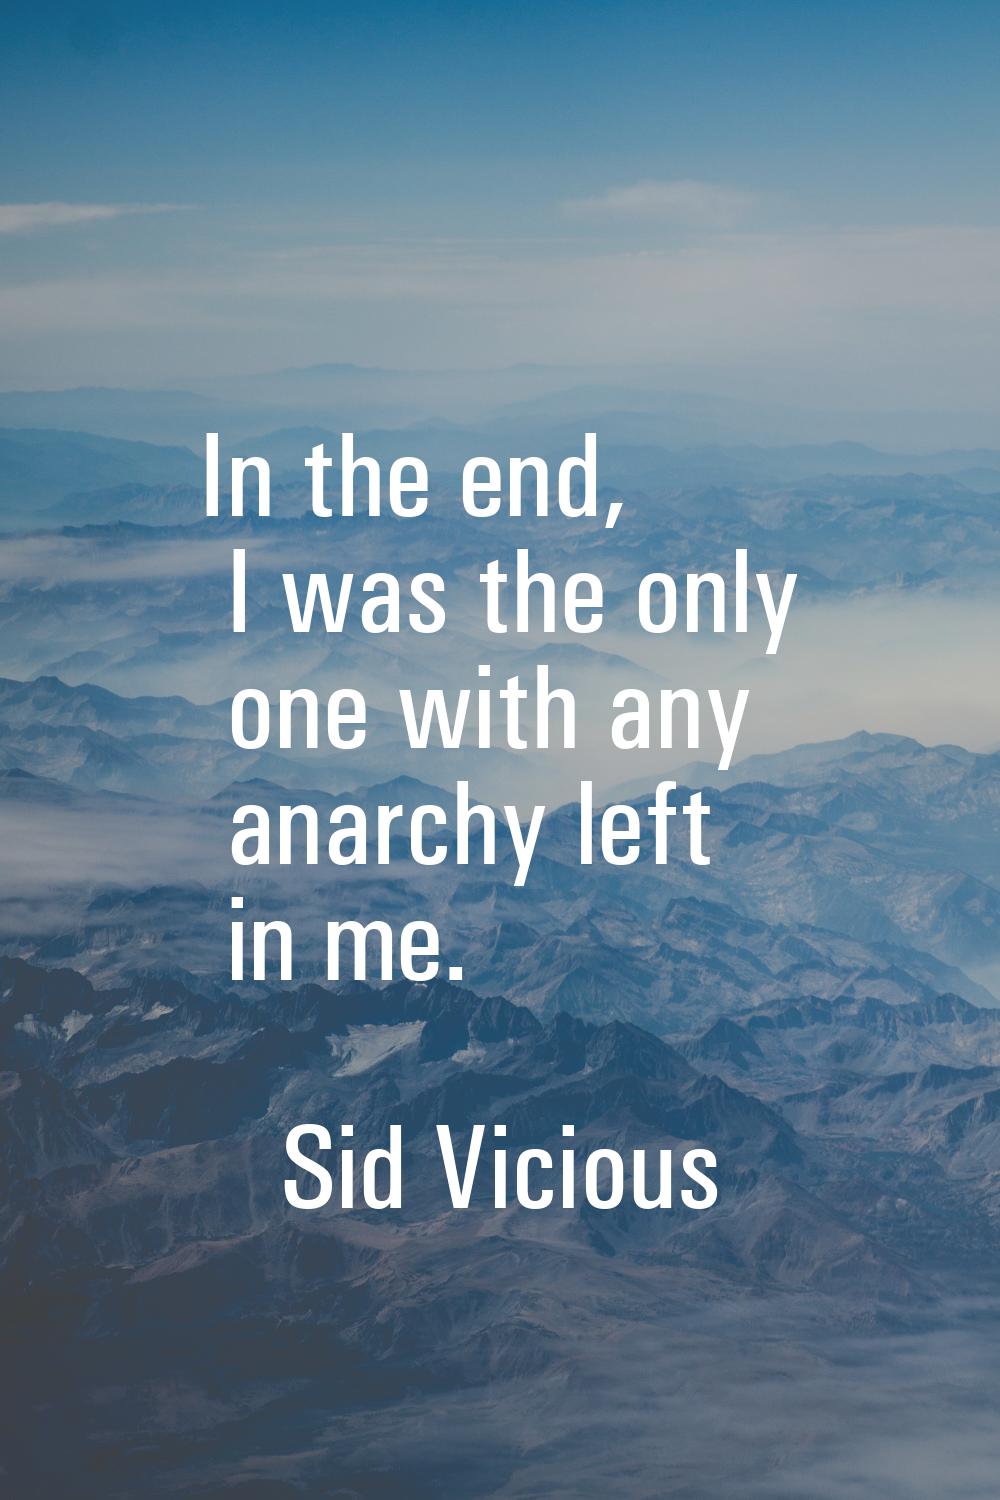 In the end, I was the only one with any anarchy left in me.